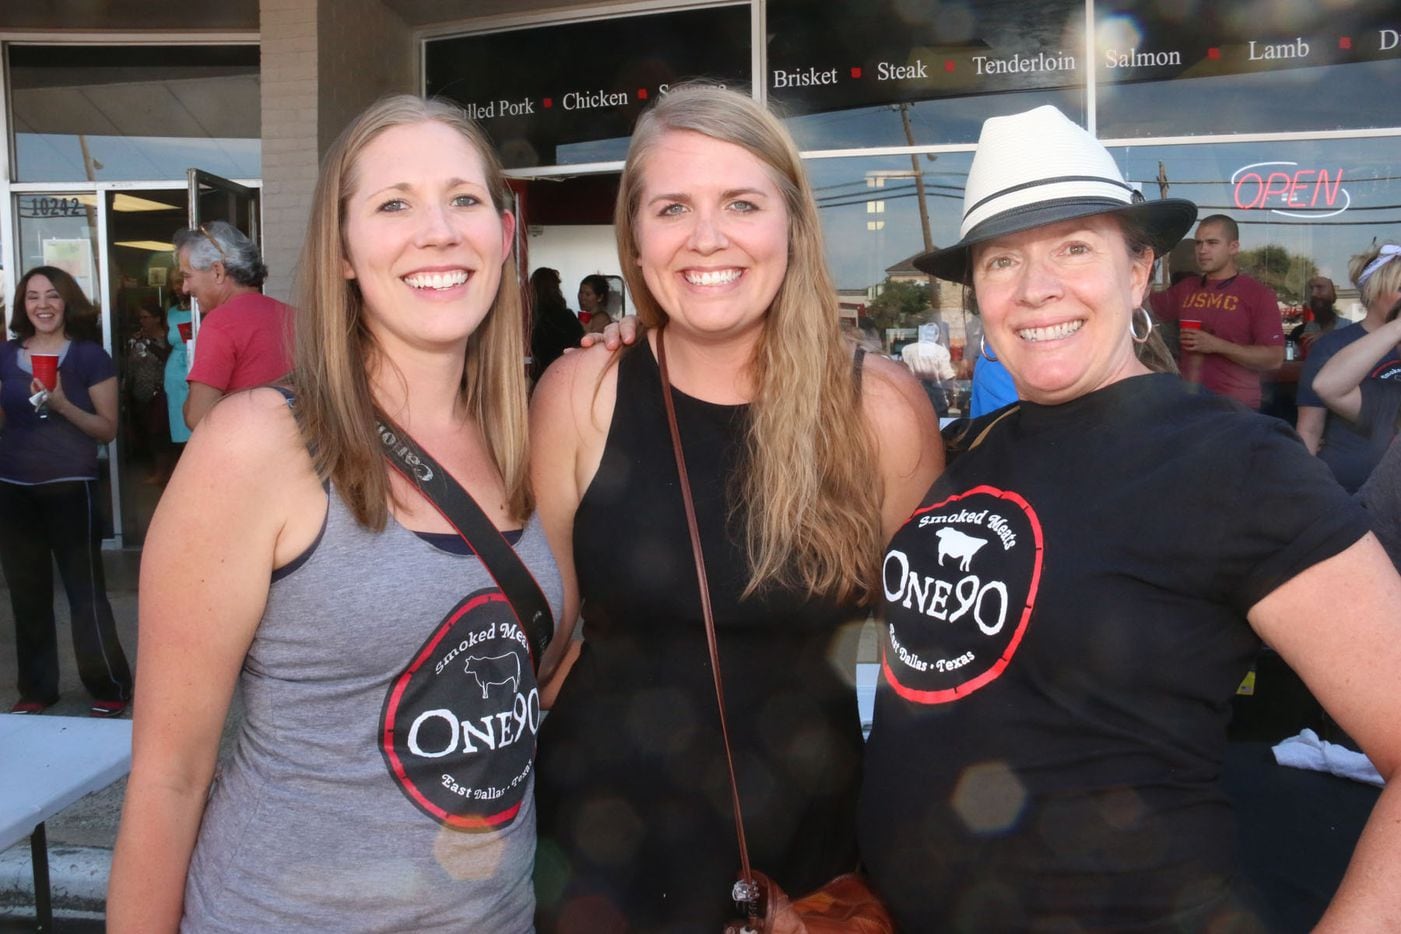 Kelly Guerra, Susie Stillwell and Krista de la Harpe at One90 Smoked Meats grand opening in...